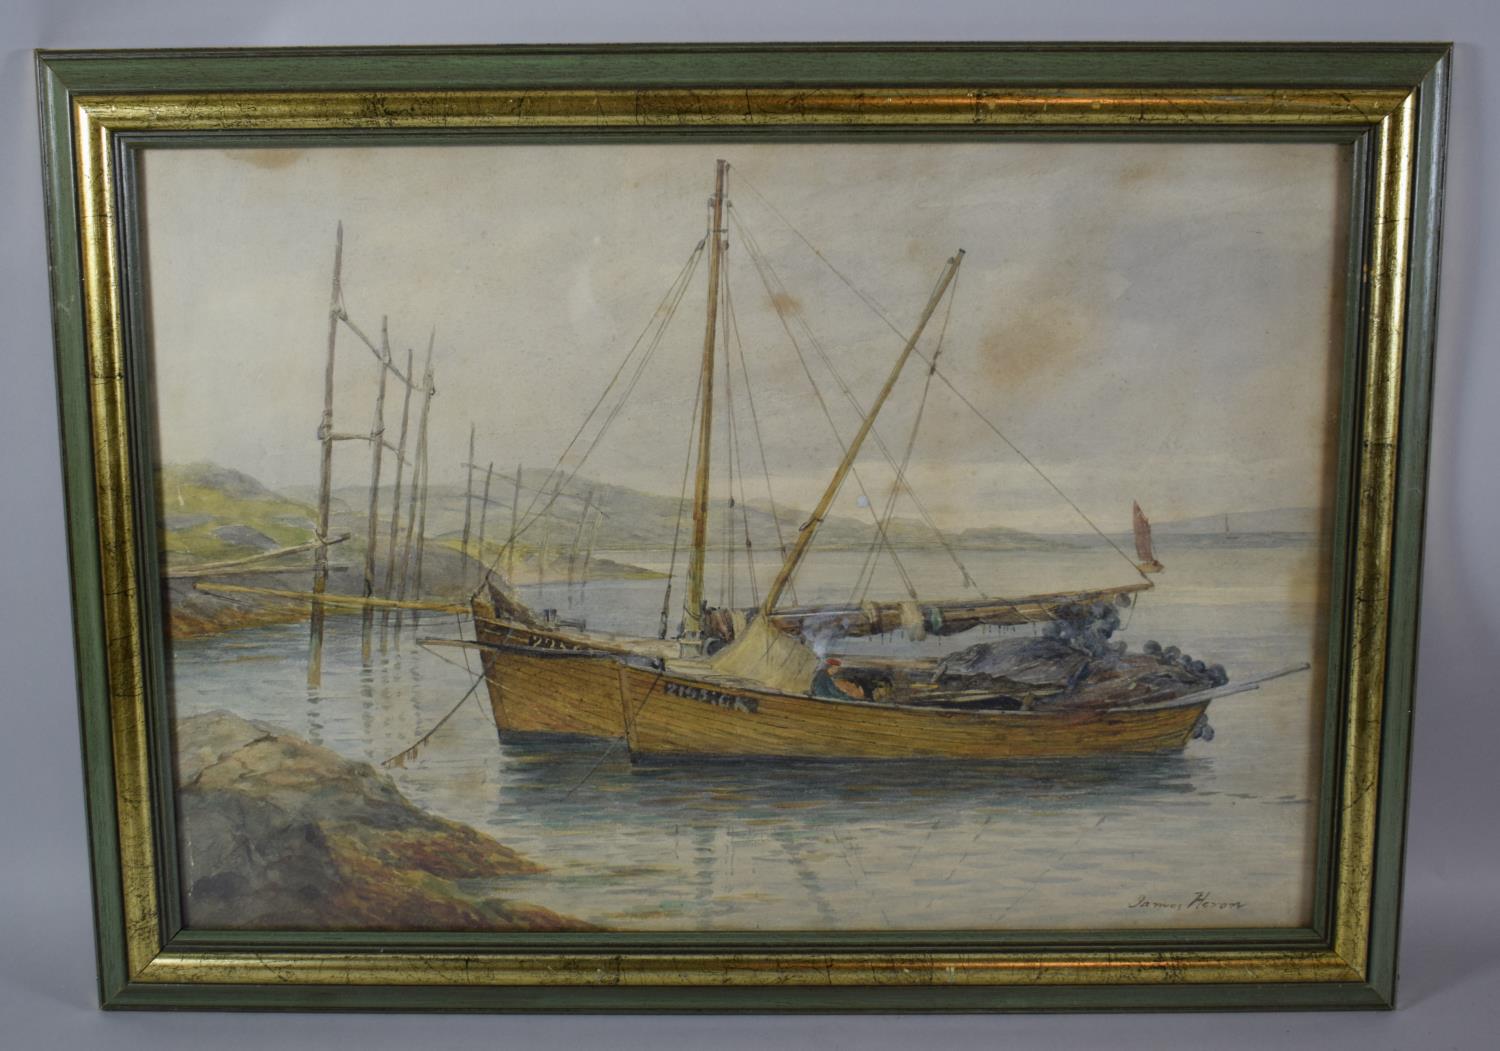 James Heron, (1873-1919), Fishing Boats with Figures on Loch Gair, Argyleshire, Watercolour ,